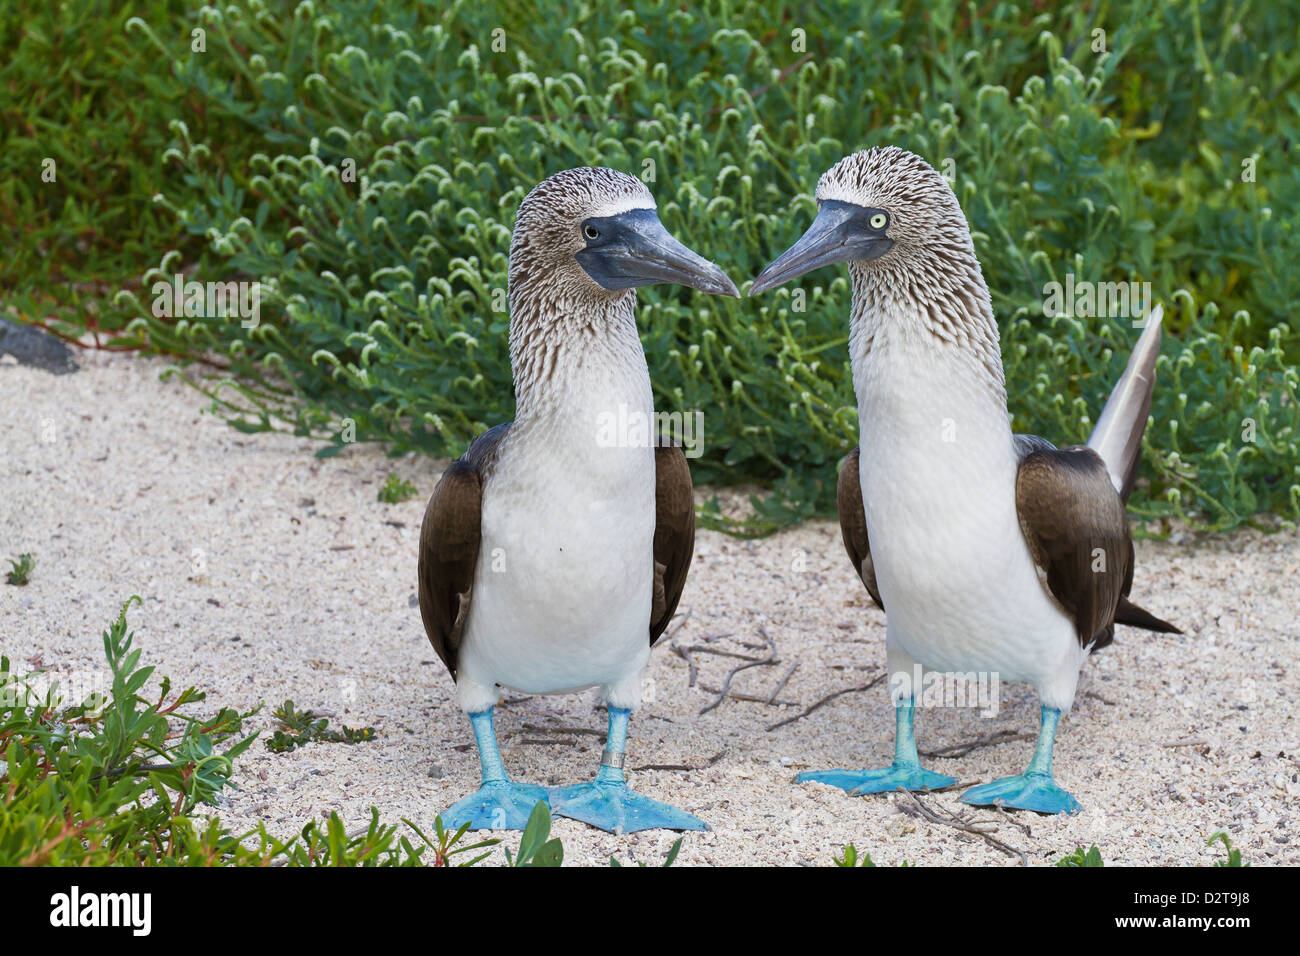 Blue-footed booby (Sula nebouxii) pair, North Seymour Island, Galapagos Islands, Ecuador, South America Stock Photo